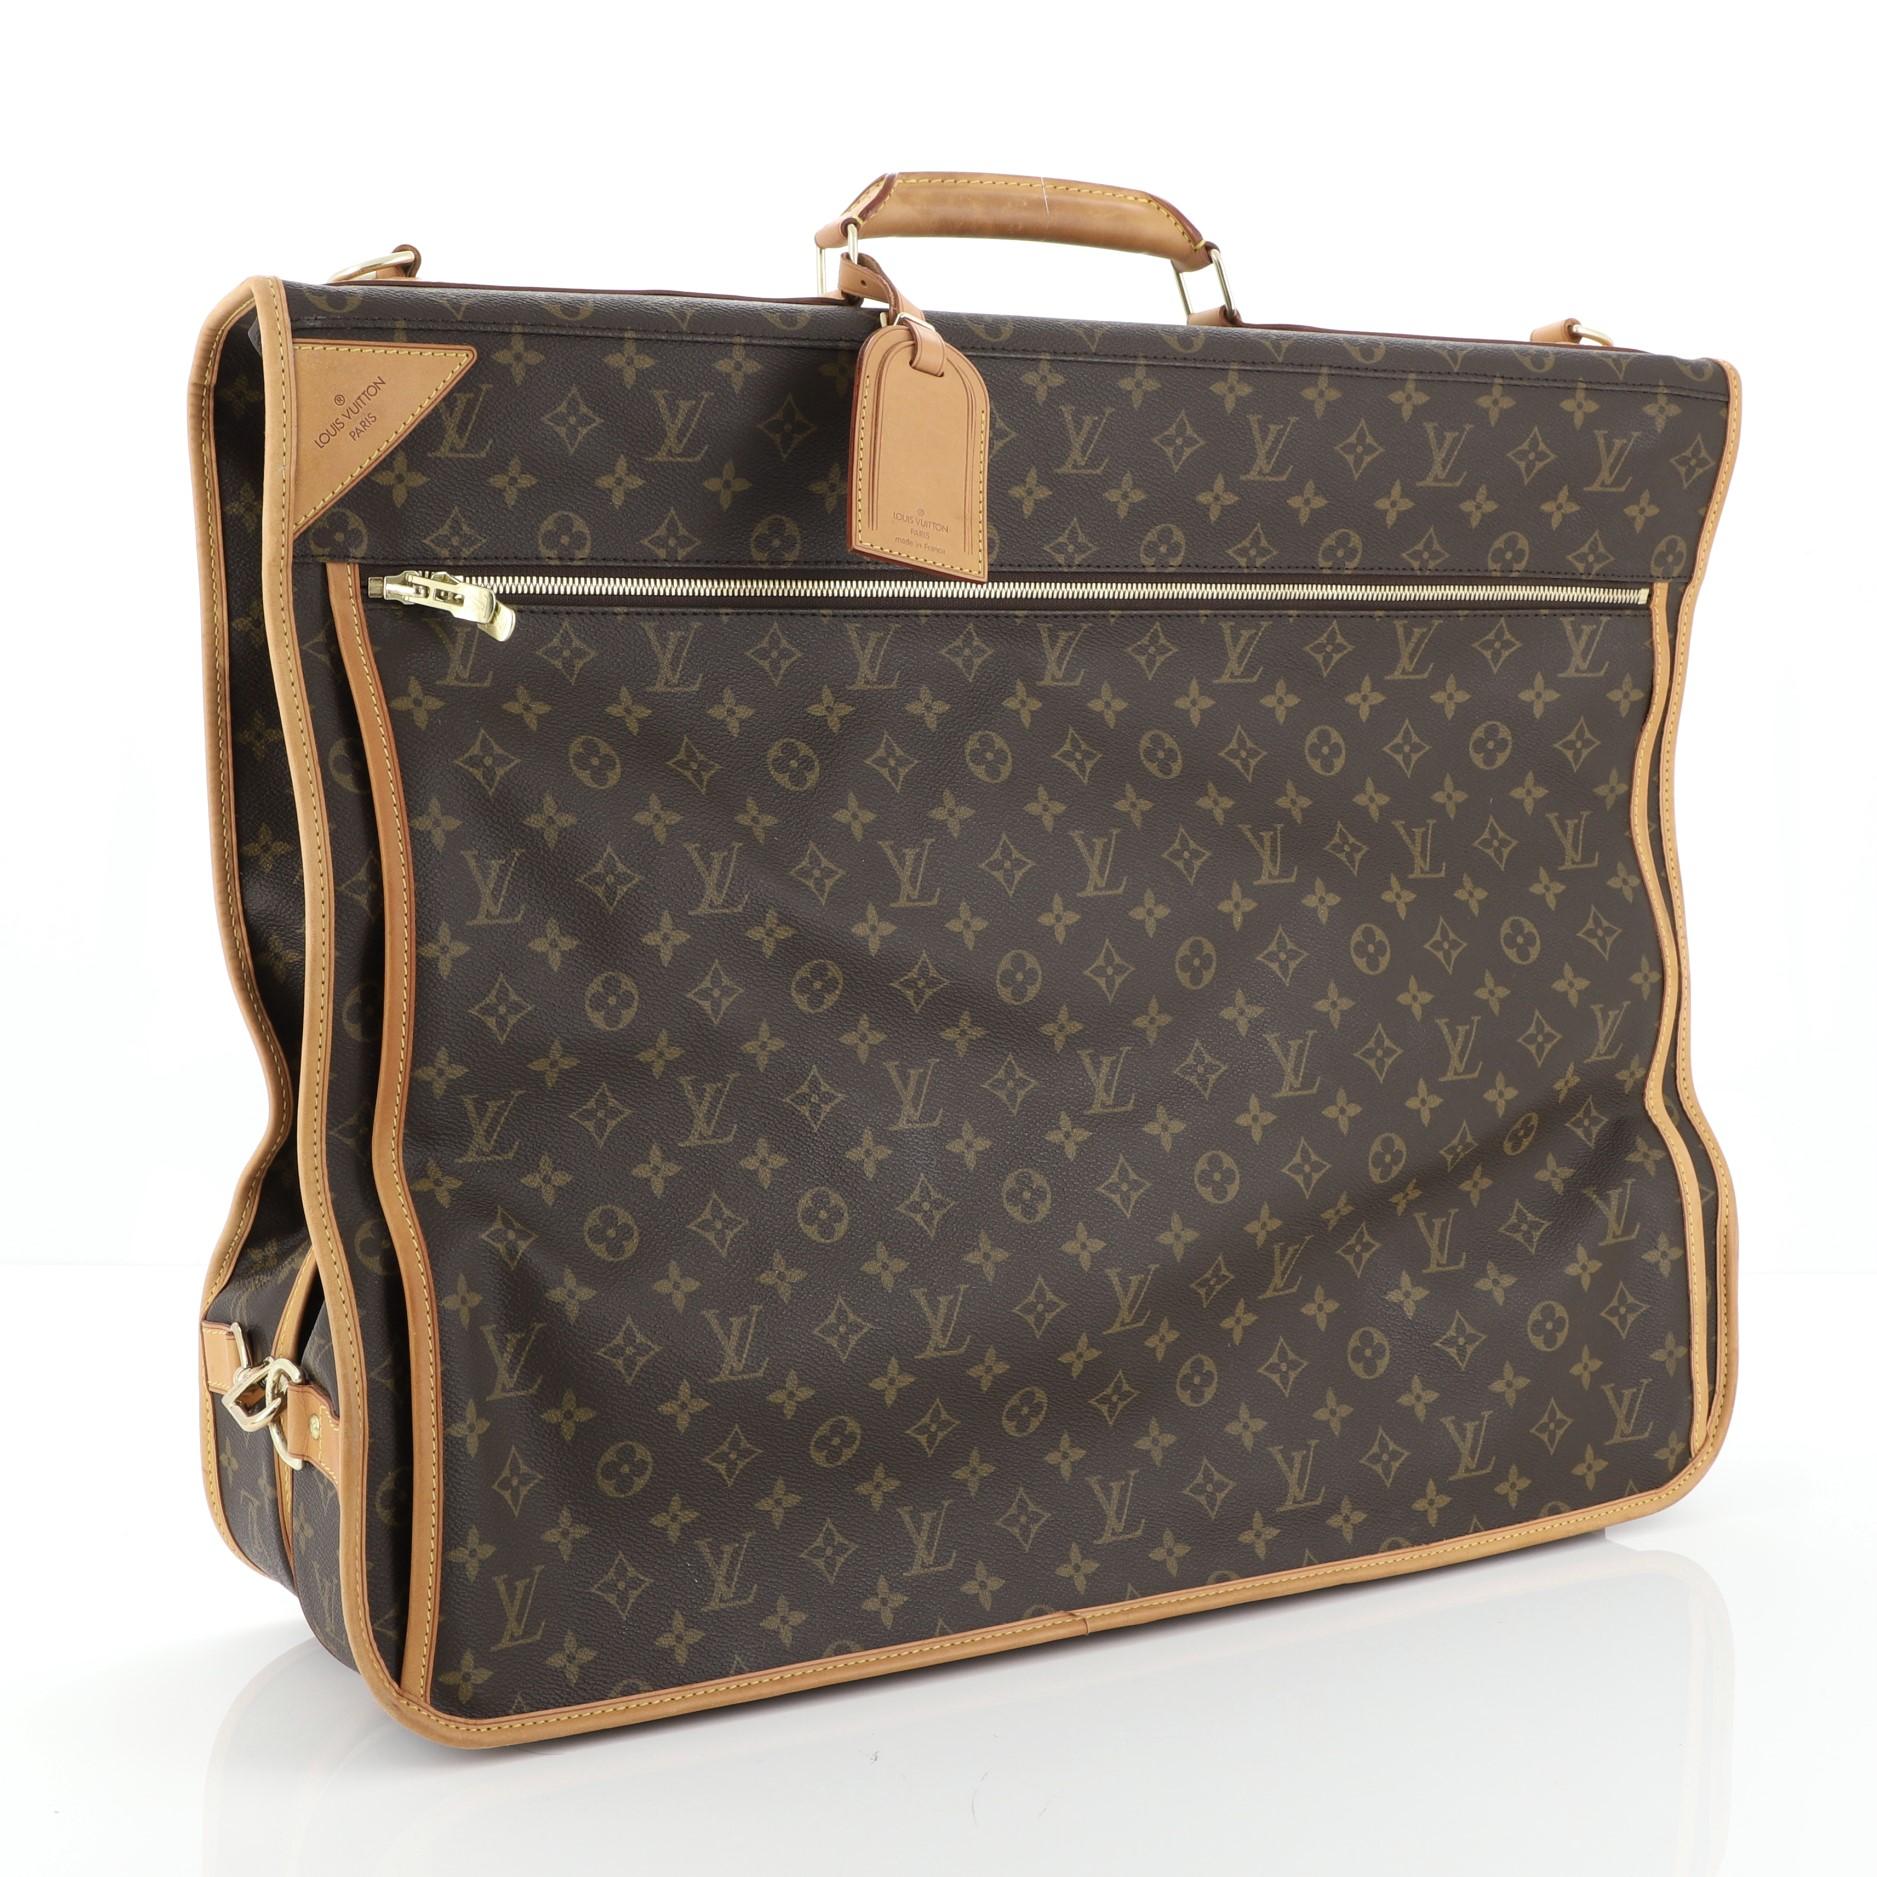 This Louis Vuitton Garment Carrier Bag Monogram Canvas Two Hangers, crafted in brown monogram coated canvas, features a flat silhouette with front zipped exterior compartments, side lock closures to keep the bag compact, top handle, gold hook at its